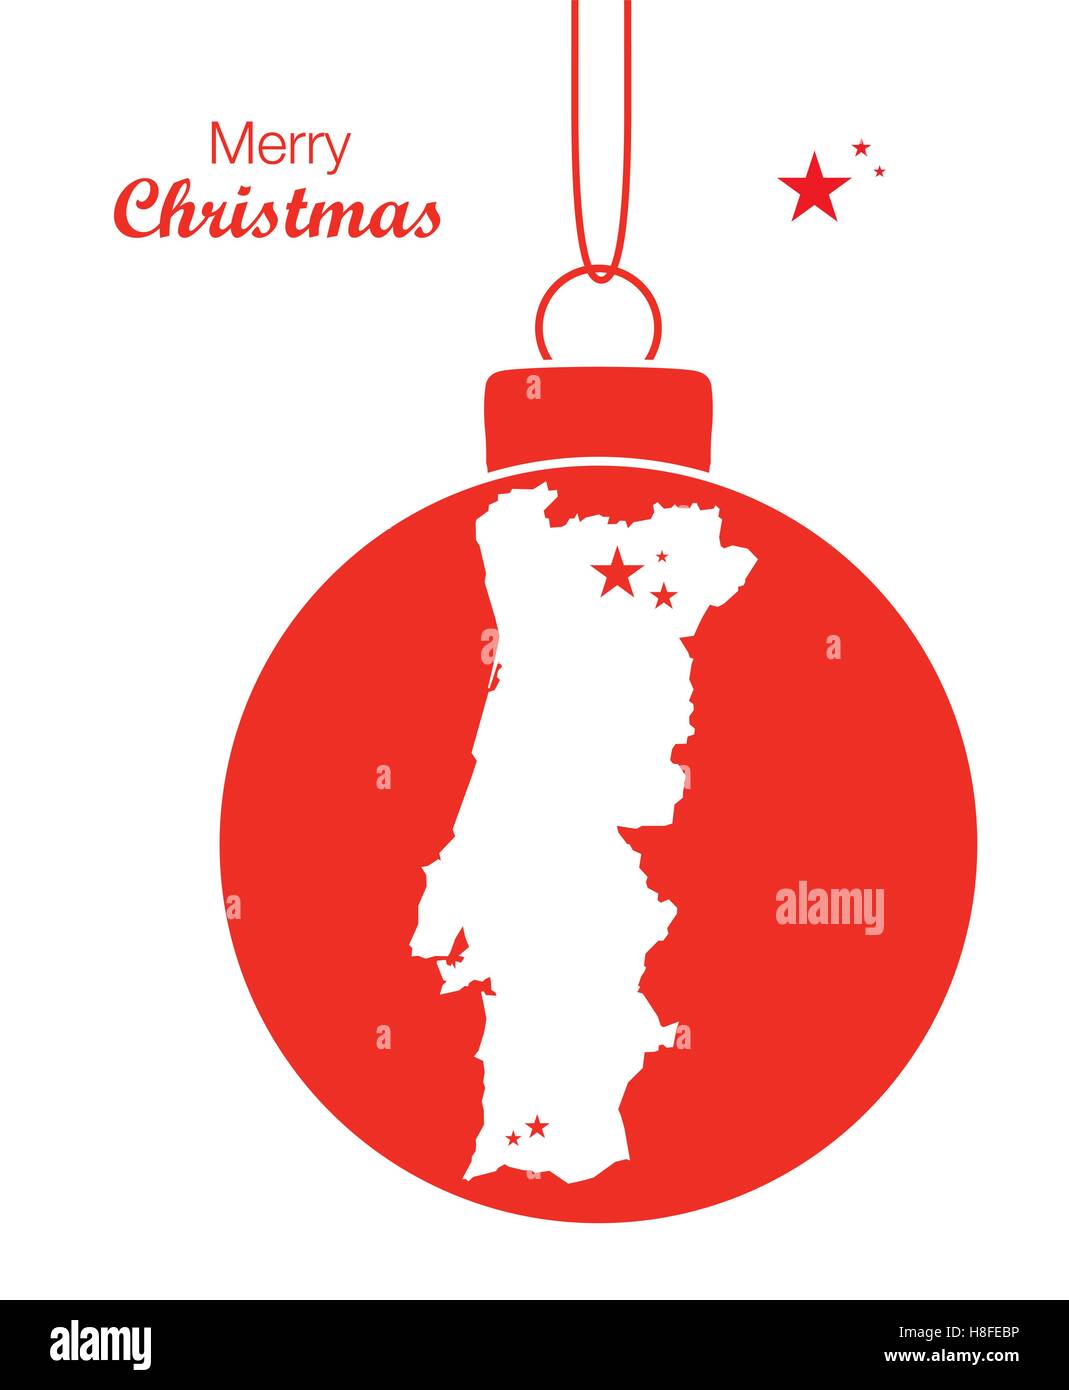 Merry Christmas Map Portugal Stock Vector